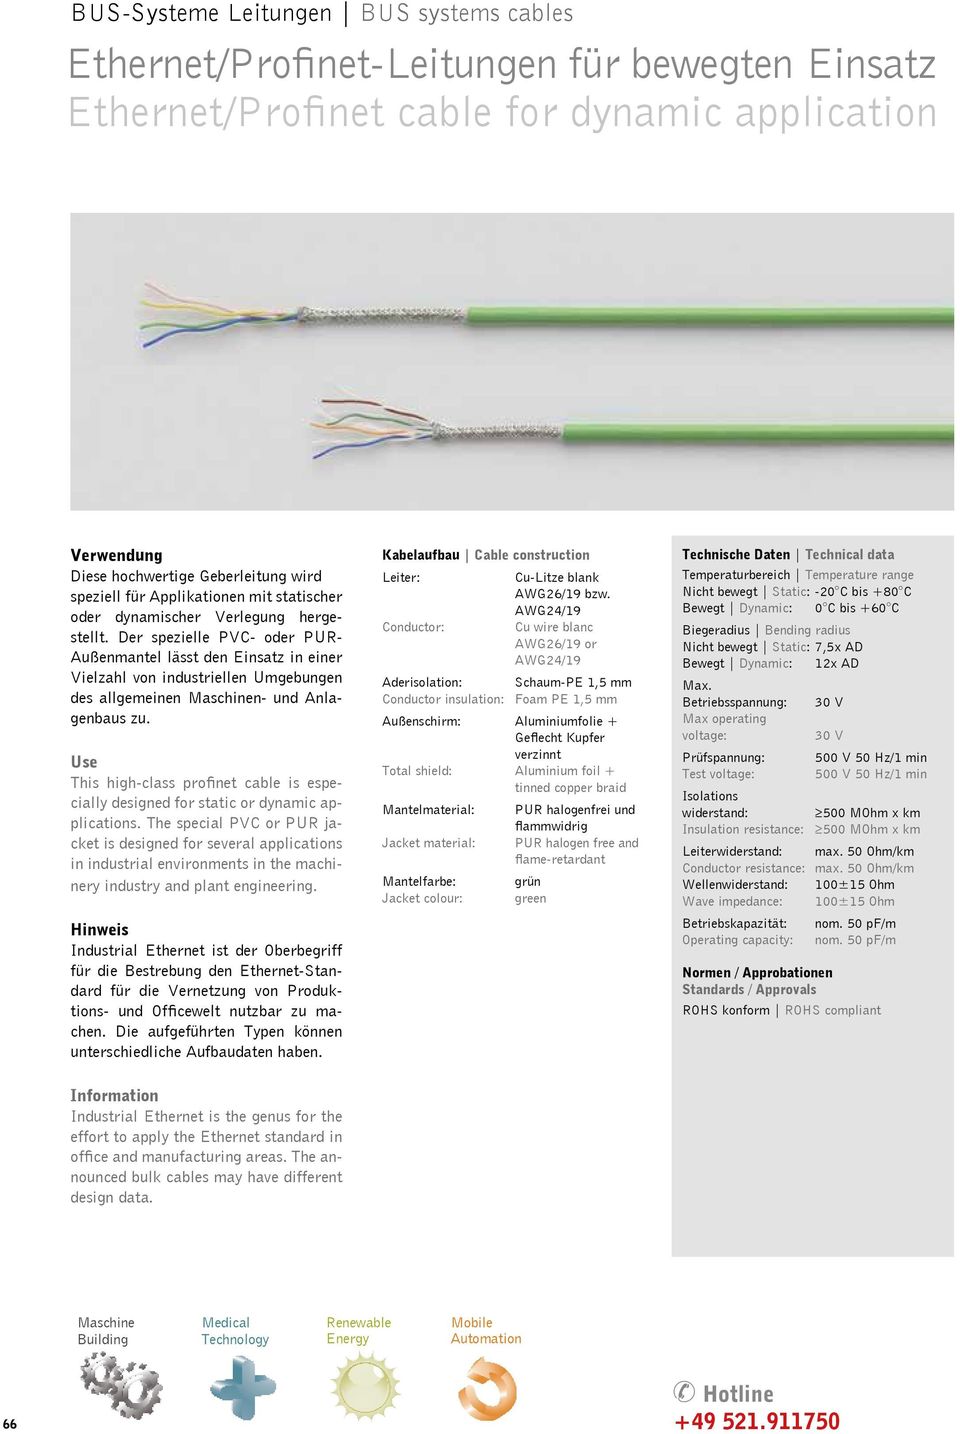 Use This high-class profinet cable is especially designed for static or dynamic applications.